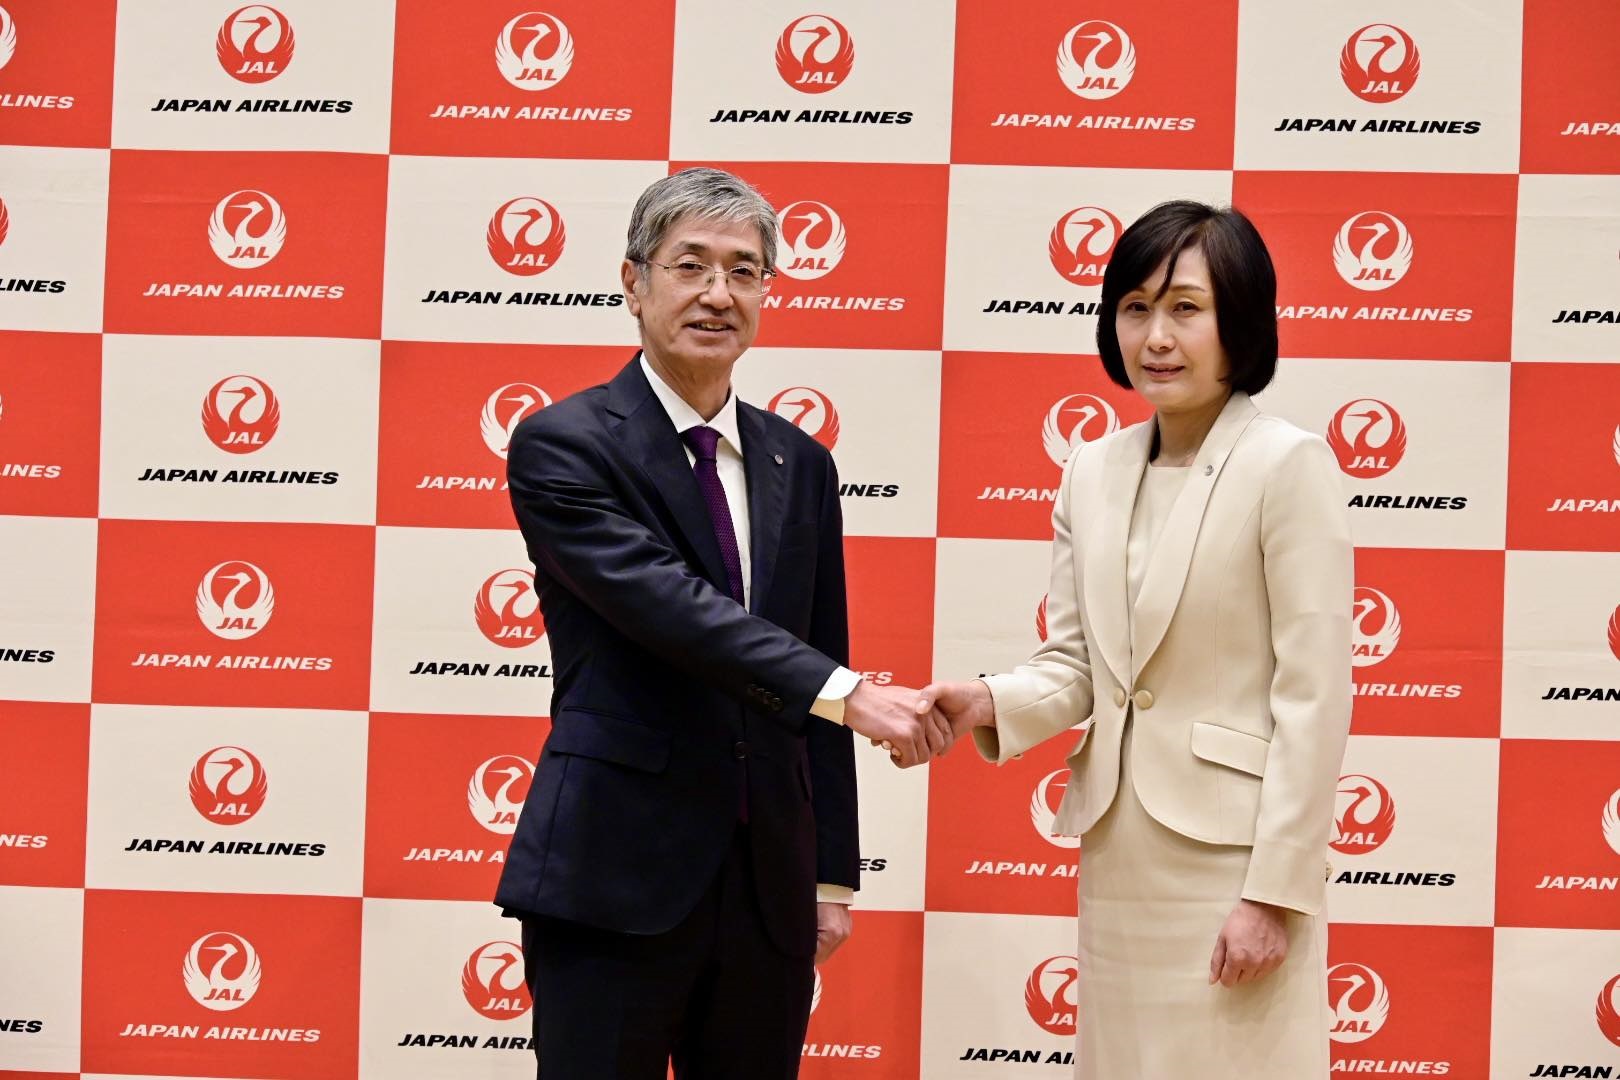 59-year-old former flight attendant who joined the company in 1985 , will be the new president of JAL.